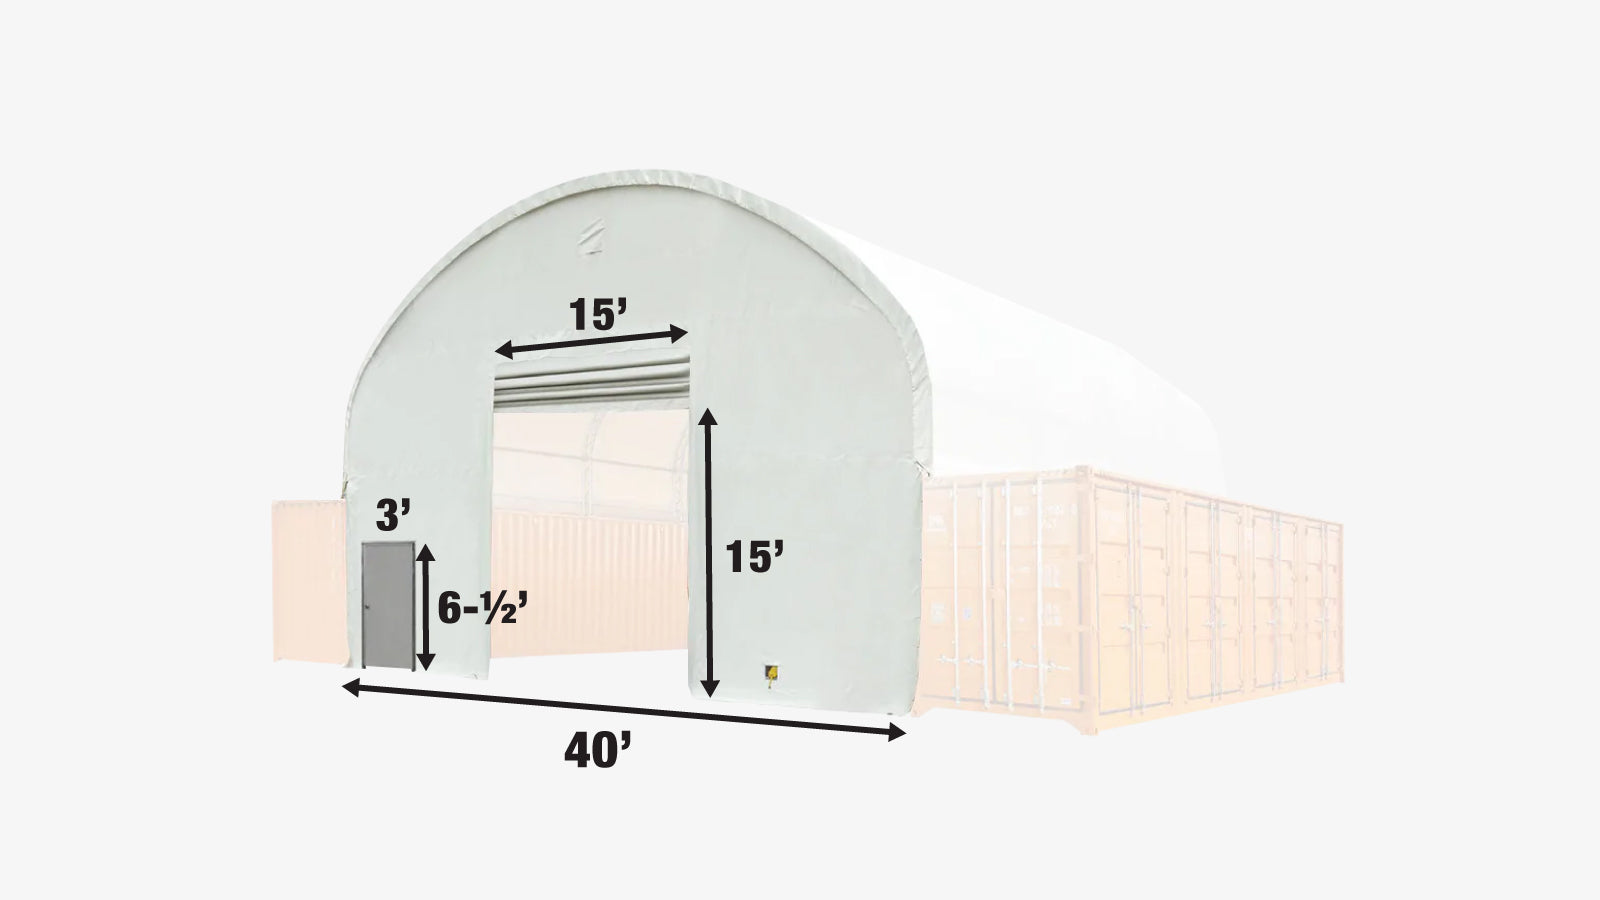 TMG Industrial Front & Back End Wall Kit, Custom Cut for TMG-DT4041C Dual Truss Container Shelter, Front Winch Roll-up Door, Steel Man Door, 21 oz PVC, TMG-DT40CFB-specifications-image